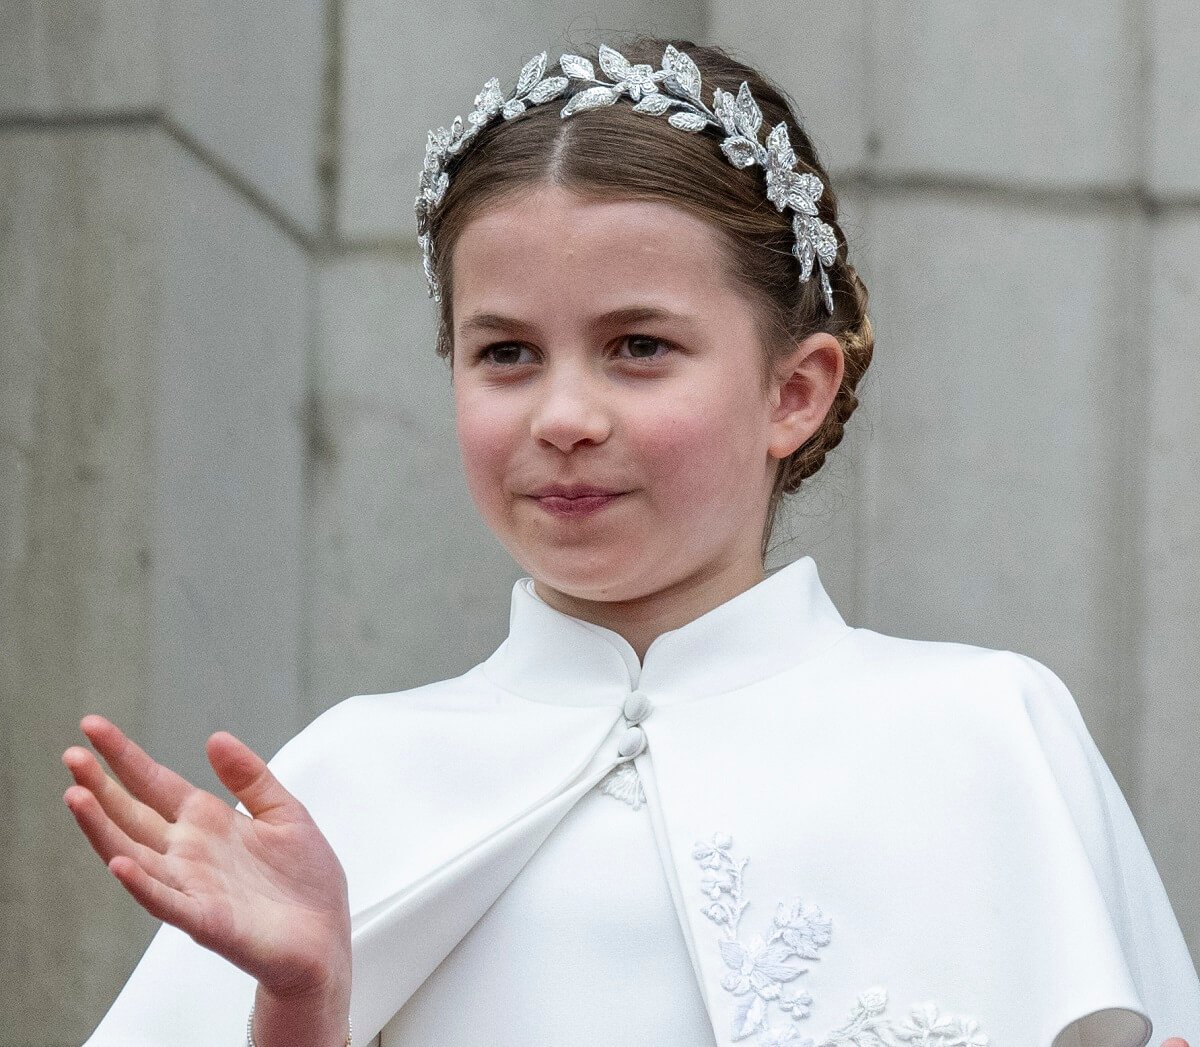 Princess Charlotte standing on the balcony of Buckingham Palace during the coronation of King Charles III